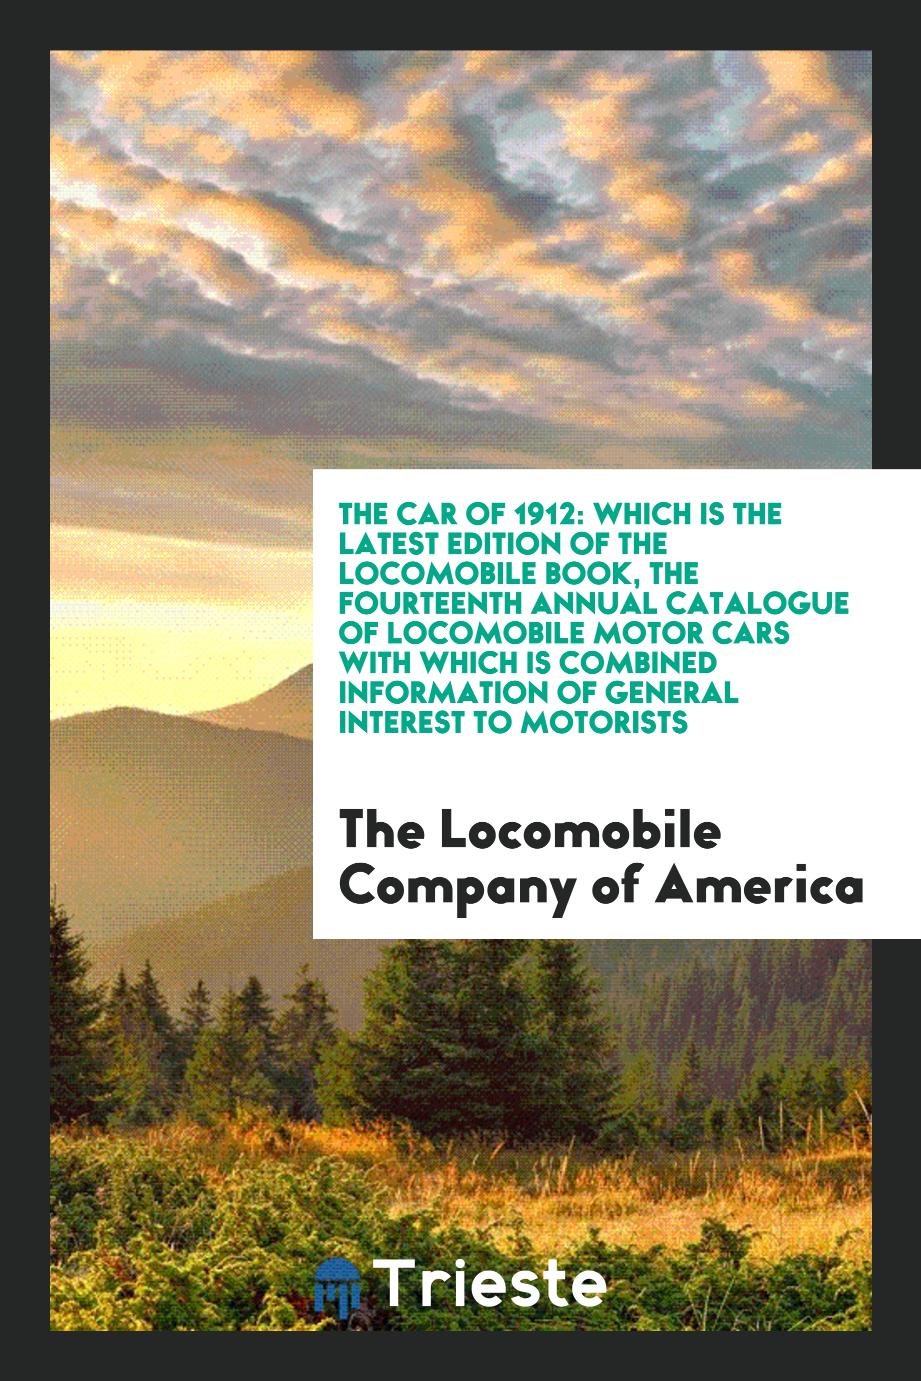 The Car of 1912: Which Is the Latest Edition of the Locomobile Book, the Fourteenth Annual Catalogue of Locomobile Motor Cars with Which Is Combined Information of General Interest to Motorists